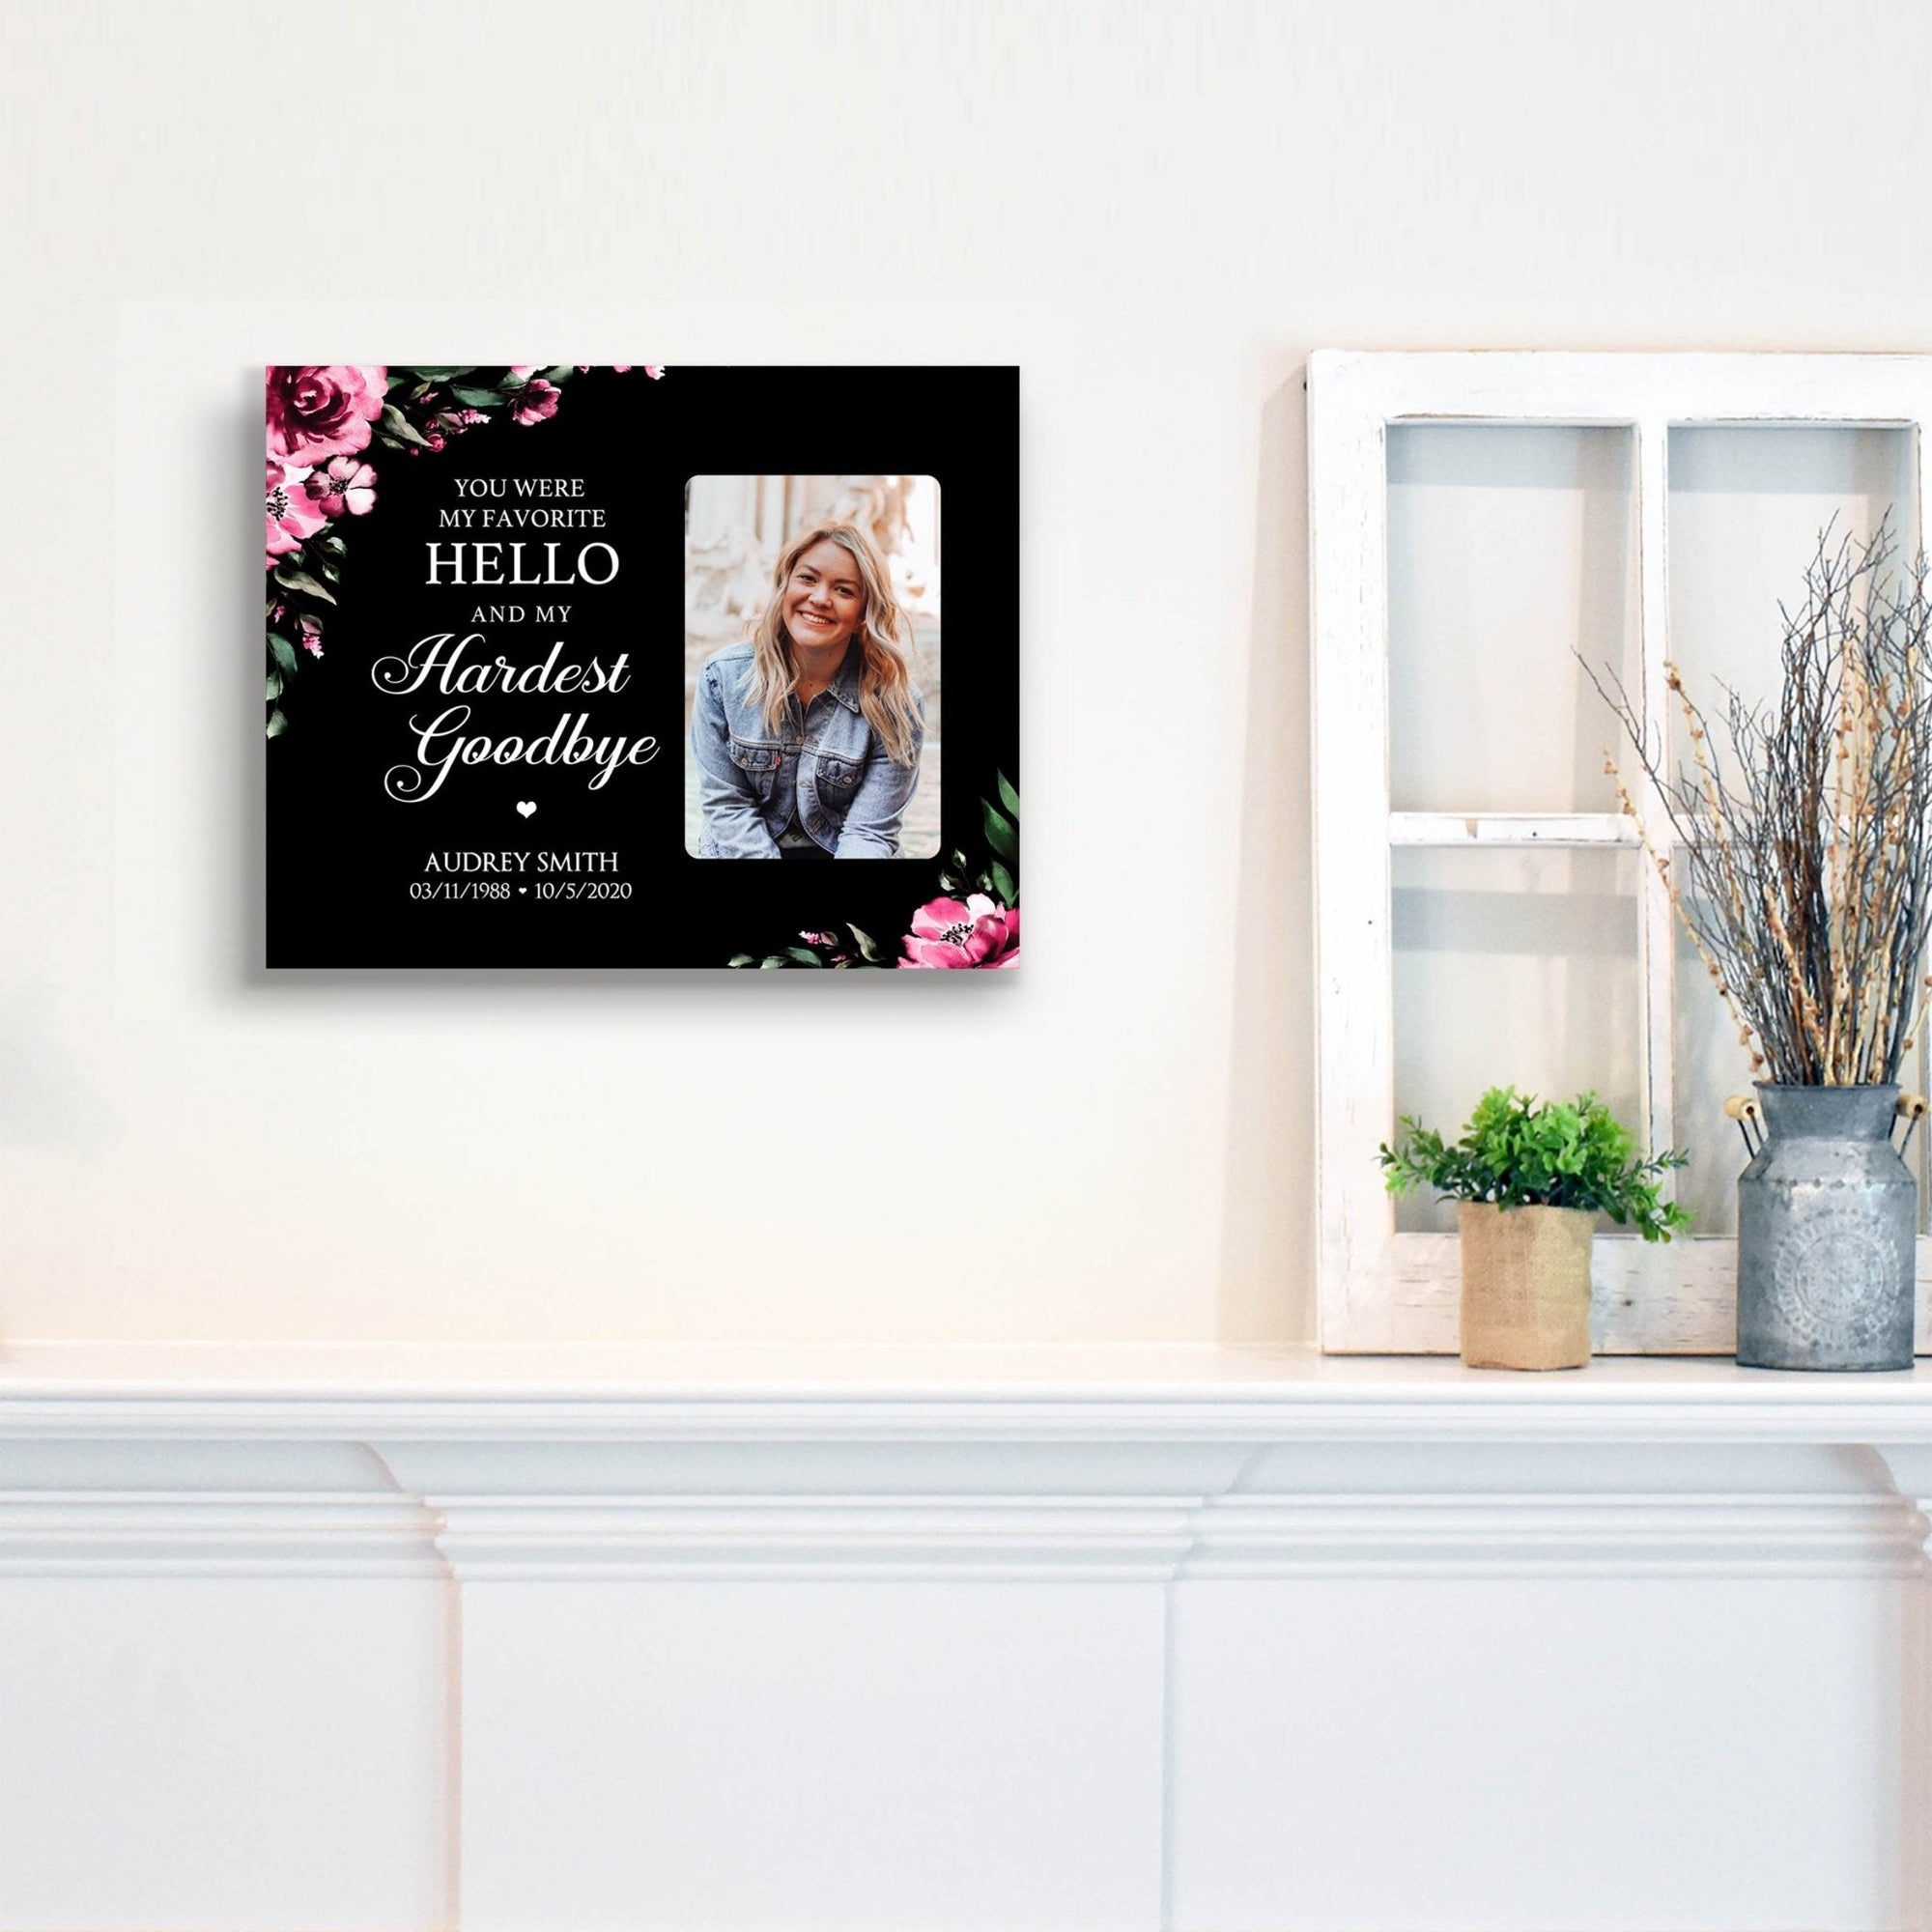 Personalized Human Memorial Black Photo & Inspirational Verse Bereavement Wall Décor & Sympathy Gift Ideas - You Were My - LifeSong Milestones